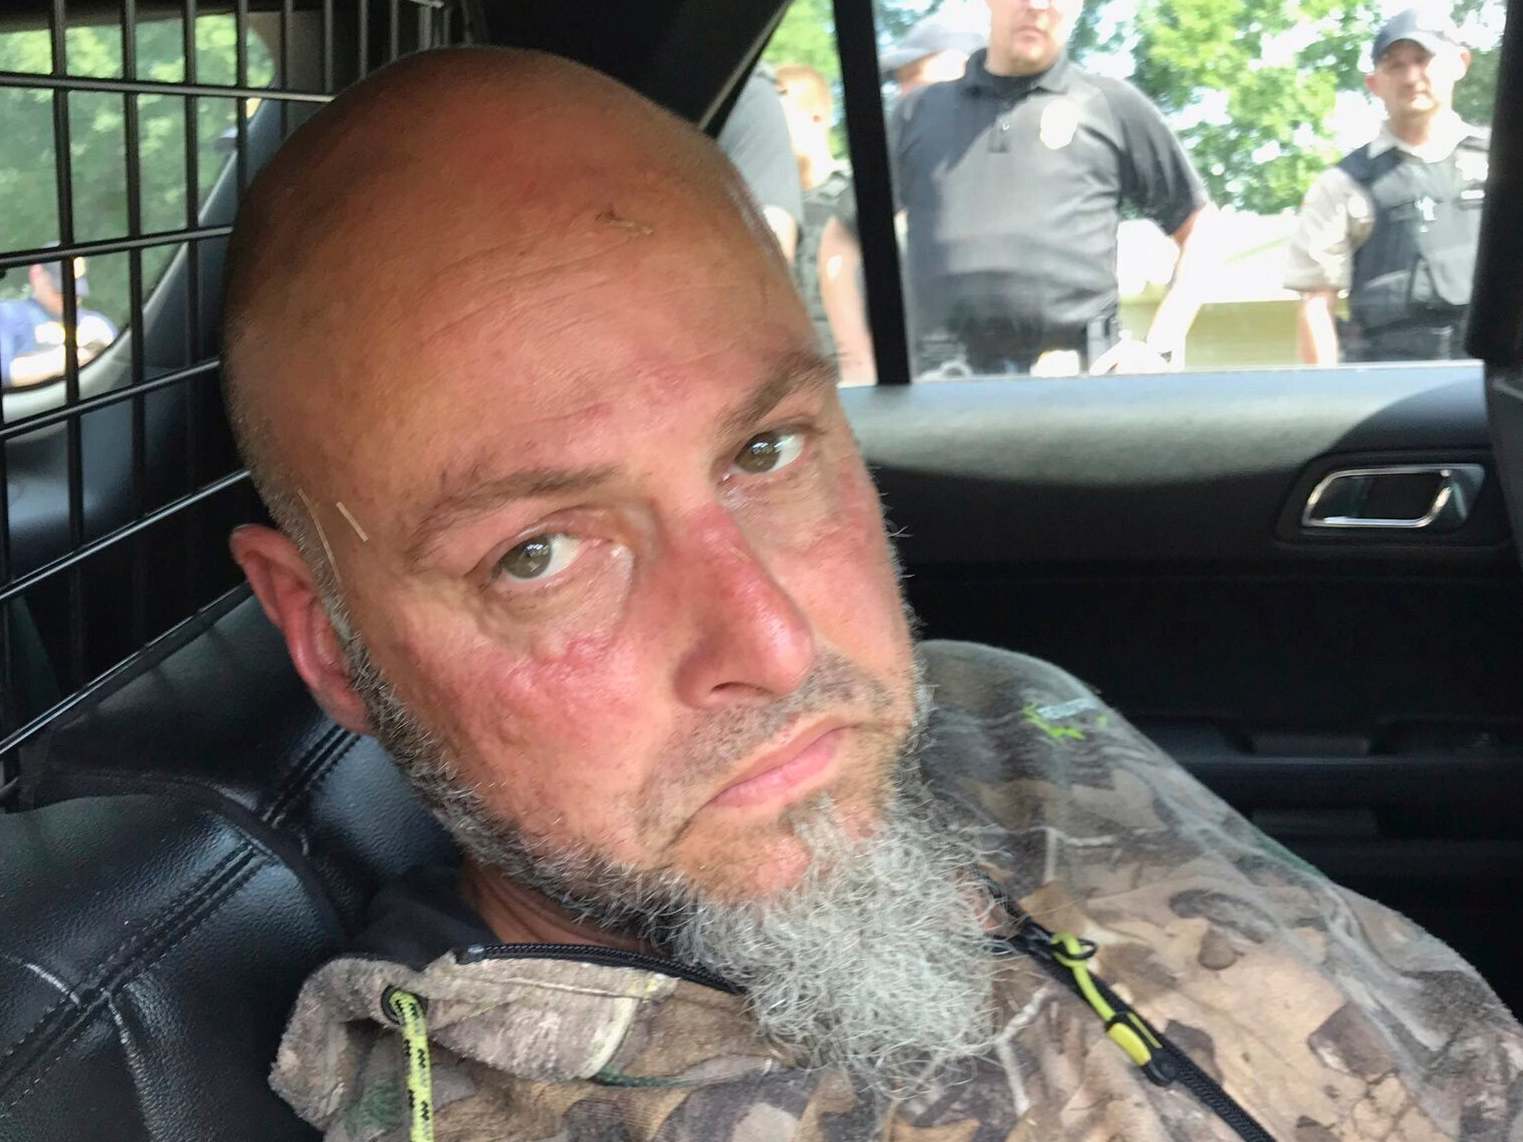 Man who escaped prison on a tractor after sexually assaulting and killing an officer captured